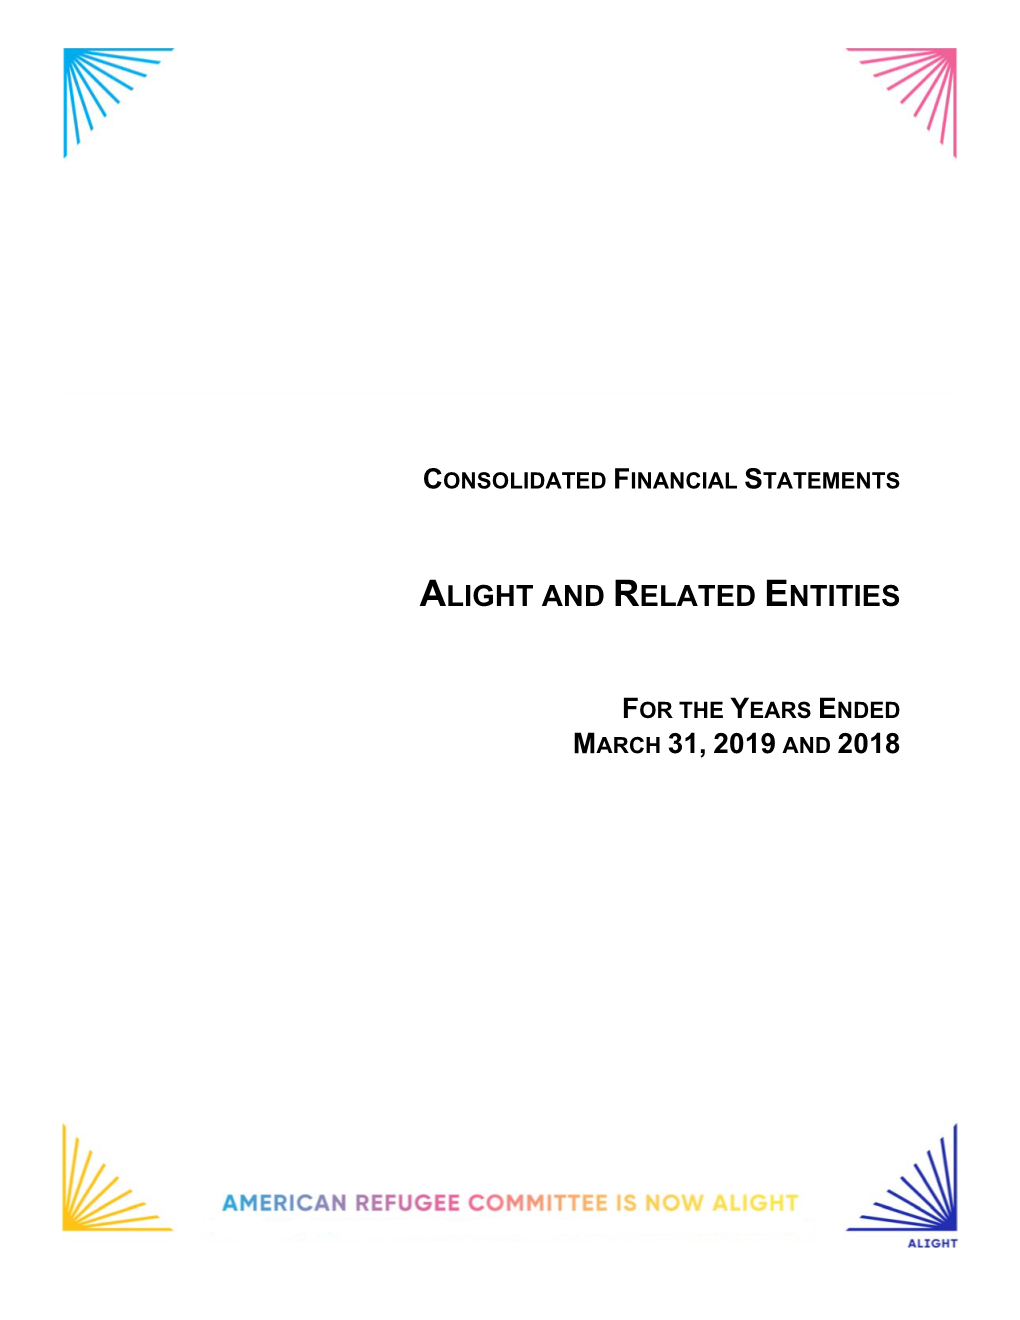 Alight and Related Entities